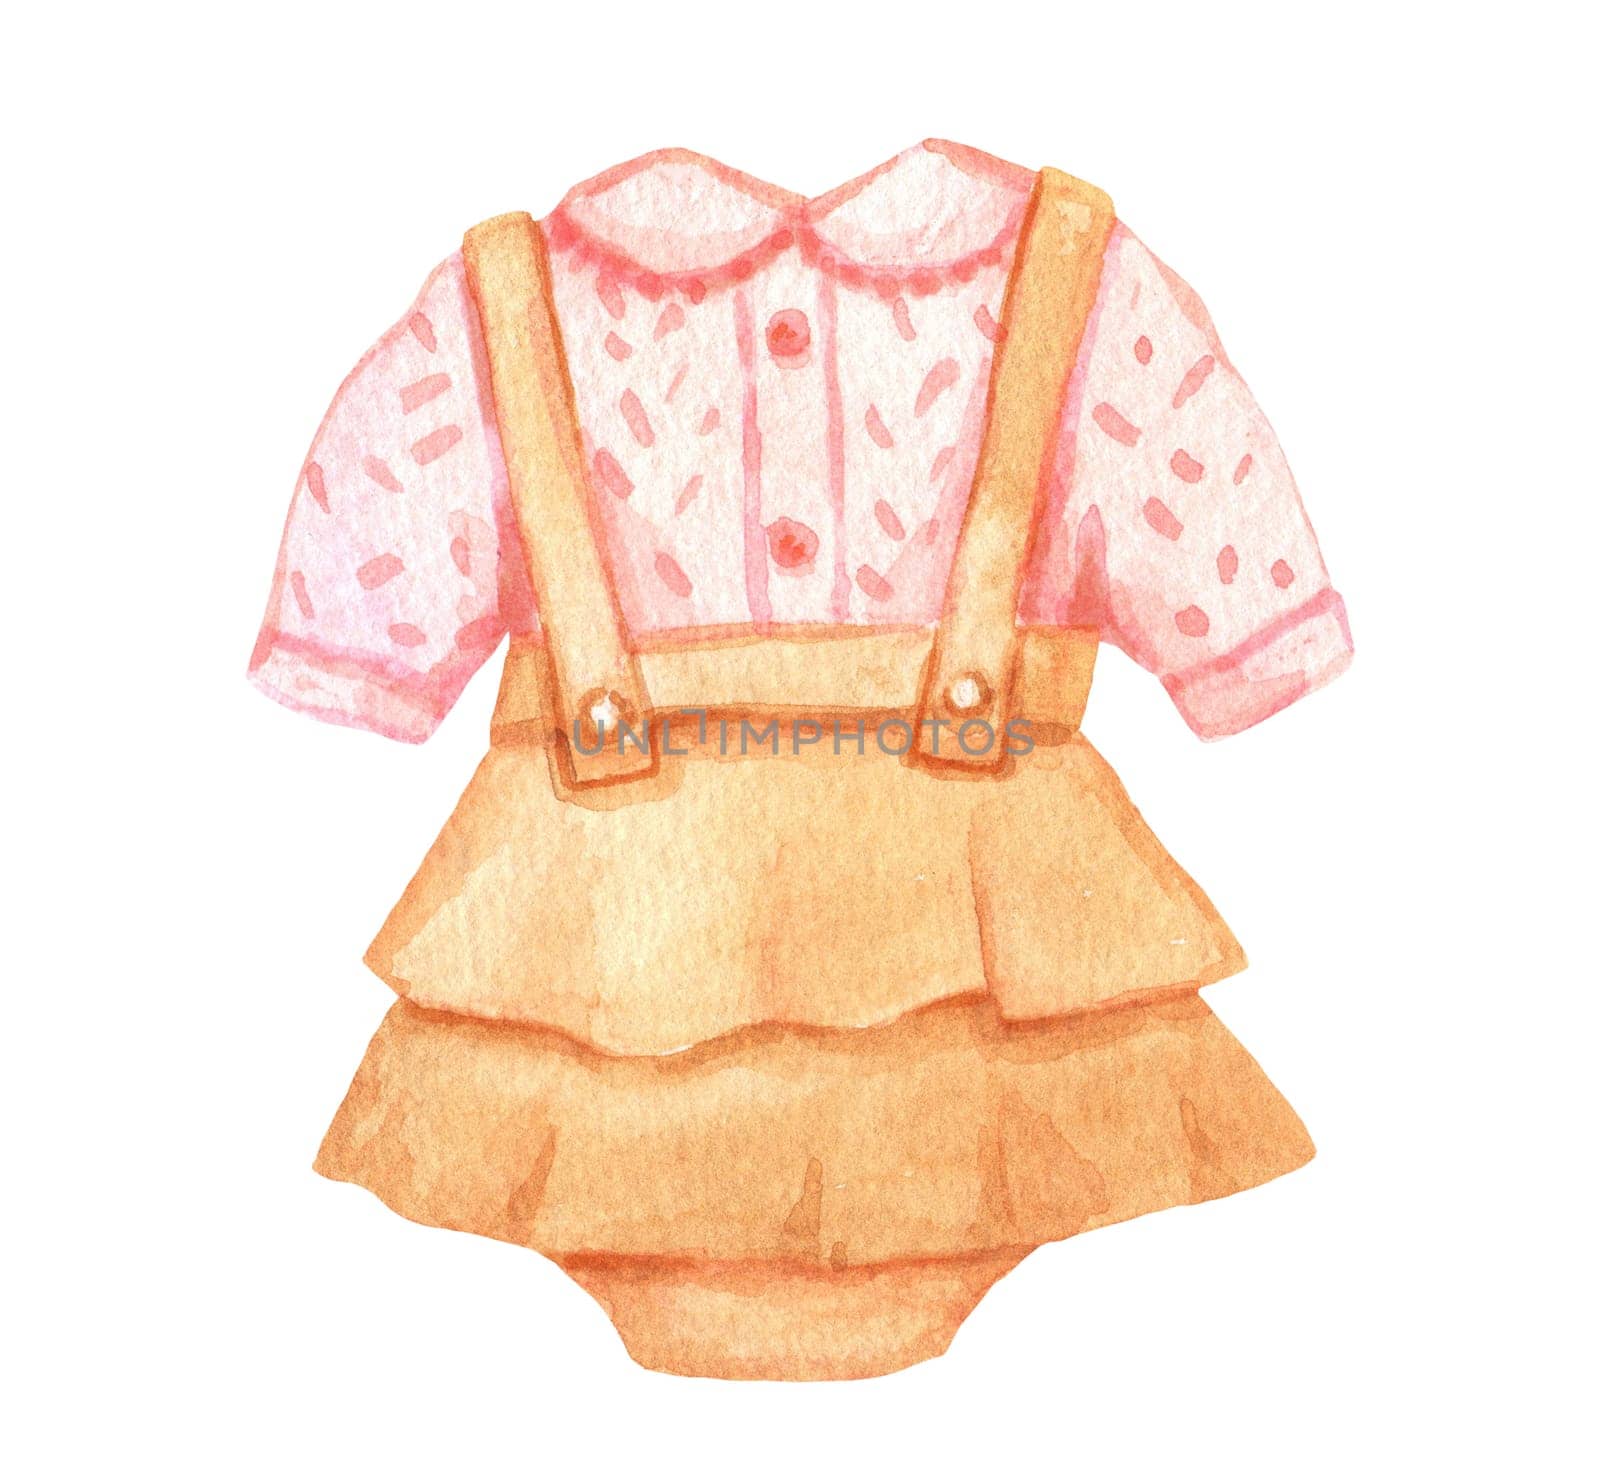 Infant cute dress illustration. Watercolor sketch Baby girl clothes isolated on white